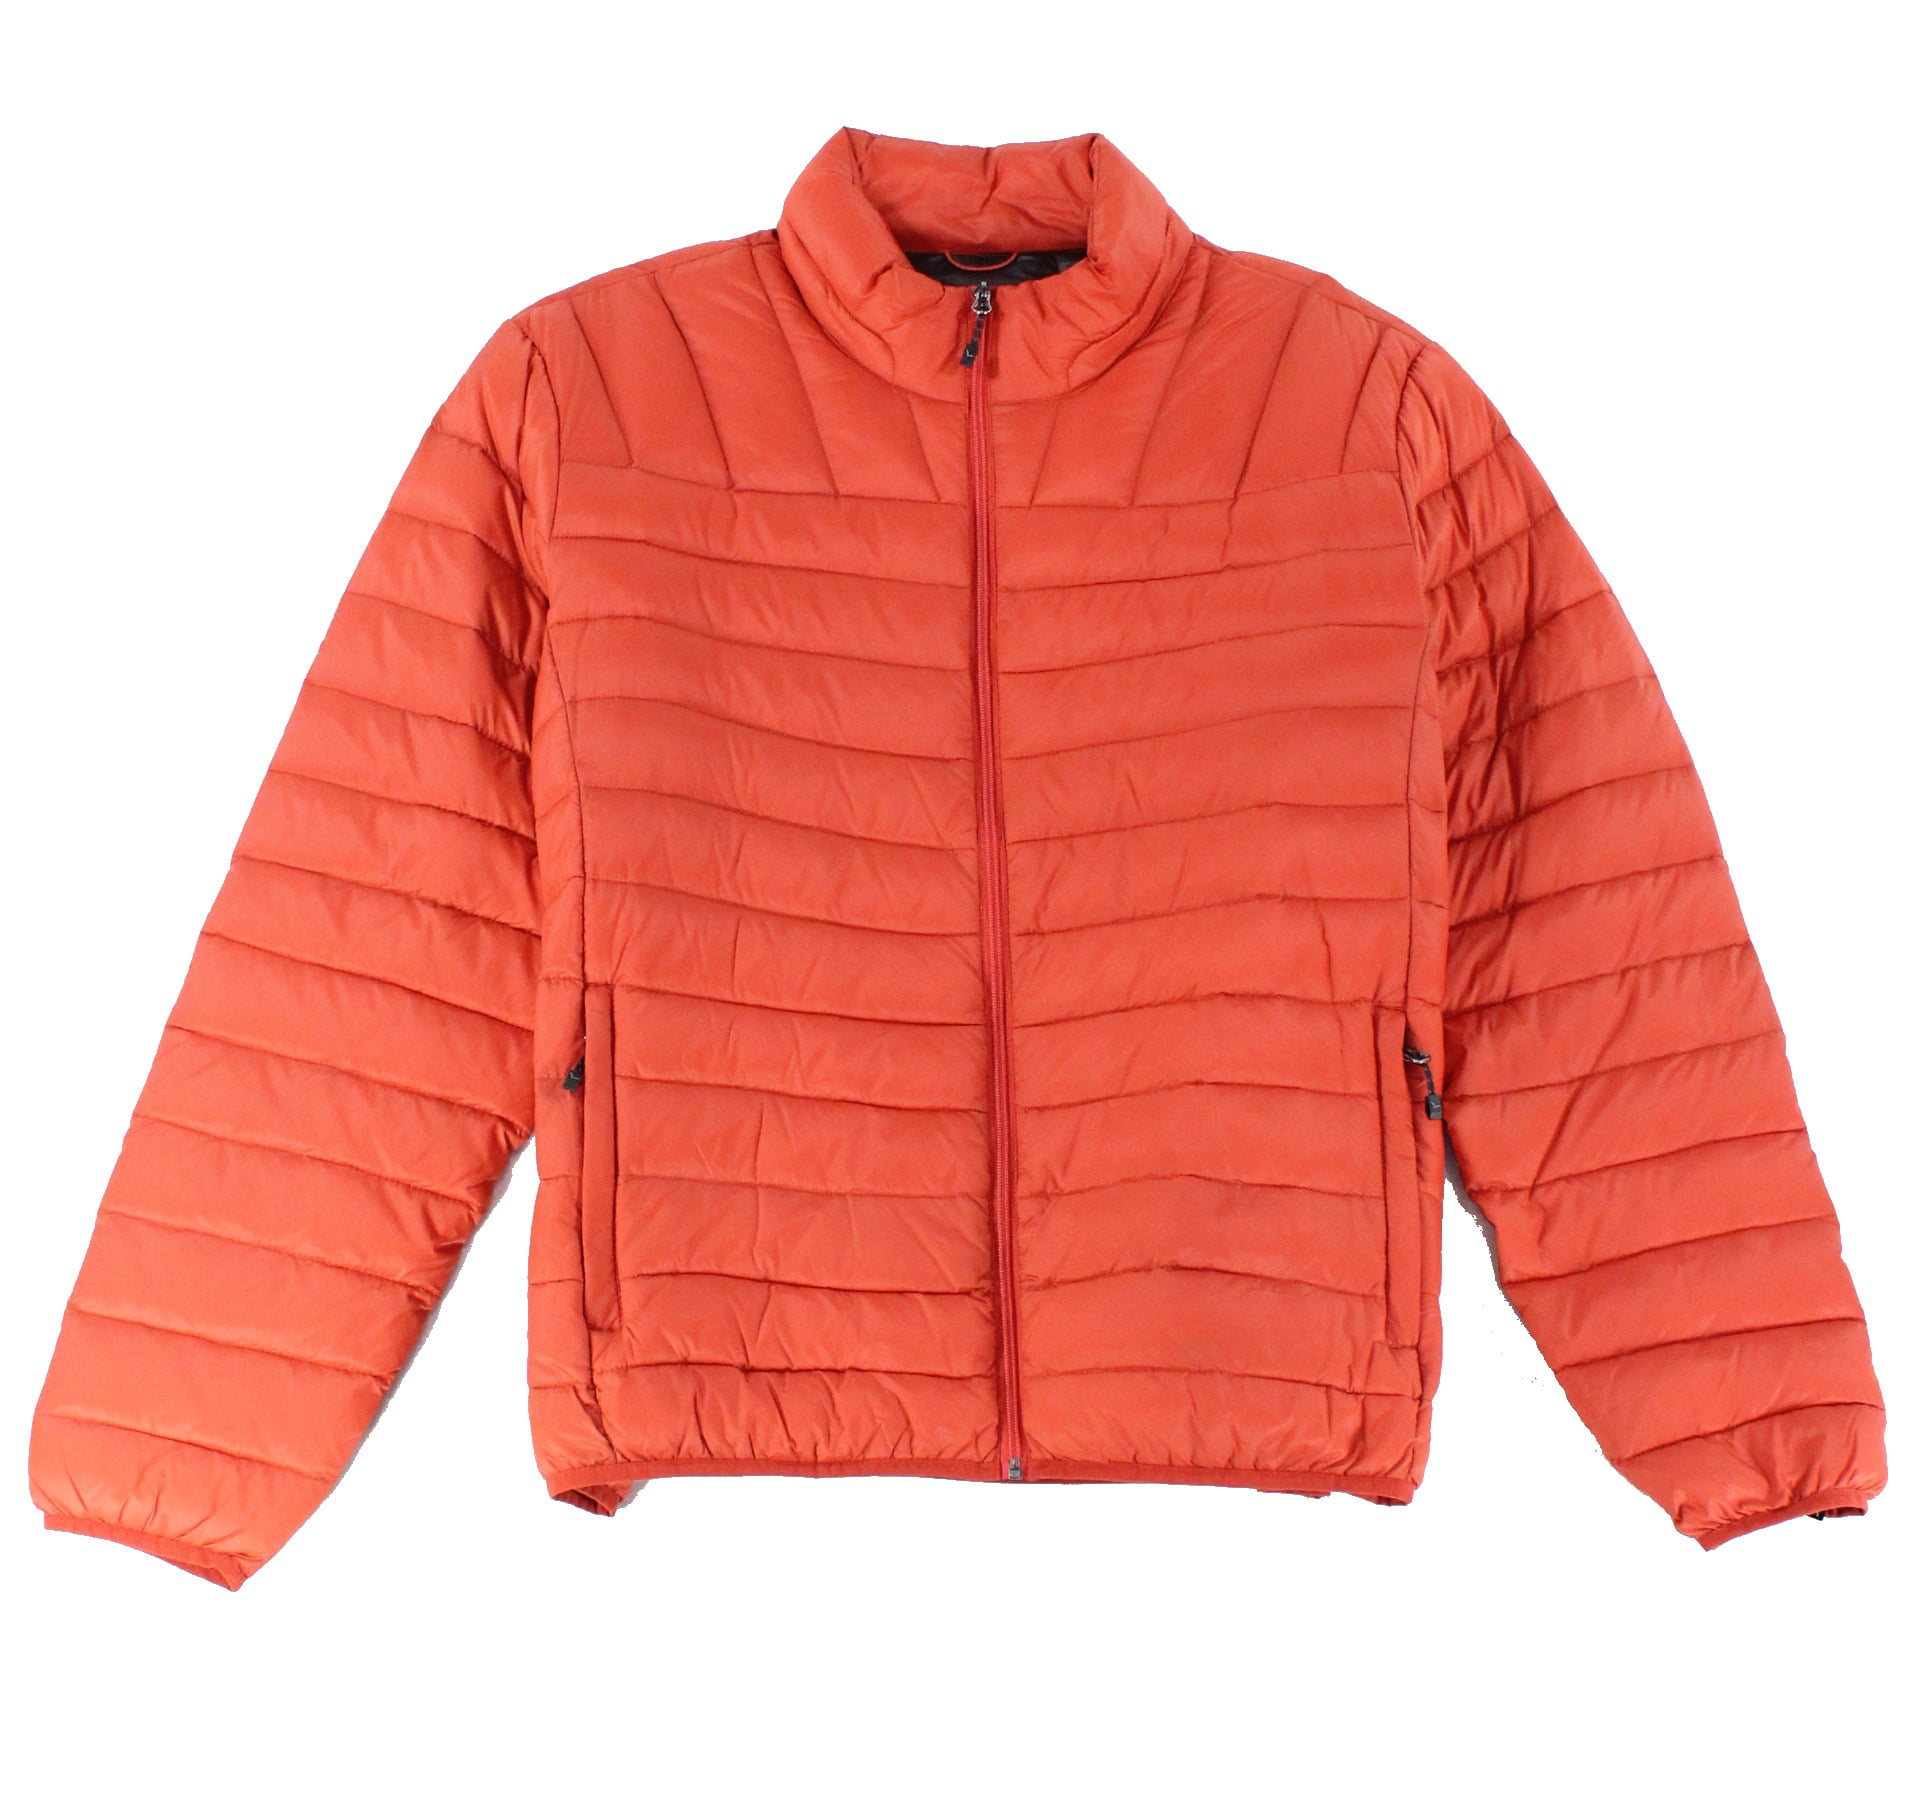 Hawke & Co. - HAWKE & CO. NEW Orange Mens Size Big 3X Quilted Full Zip ...